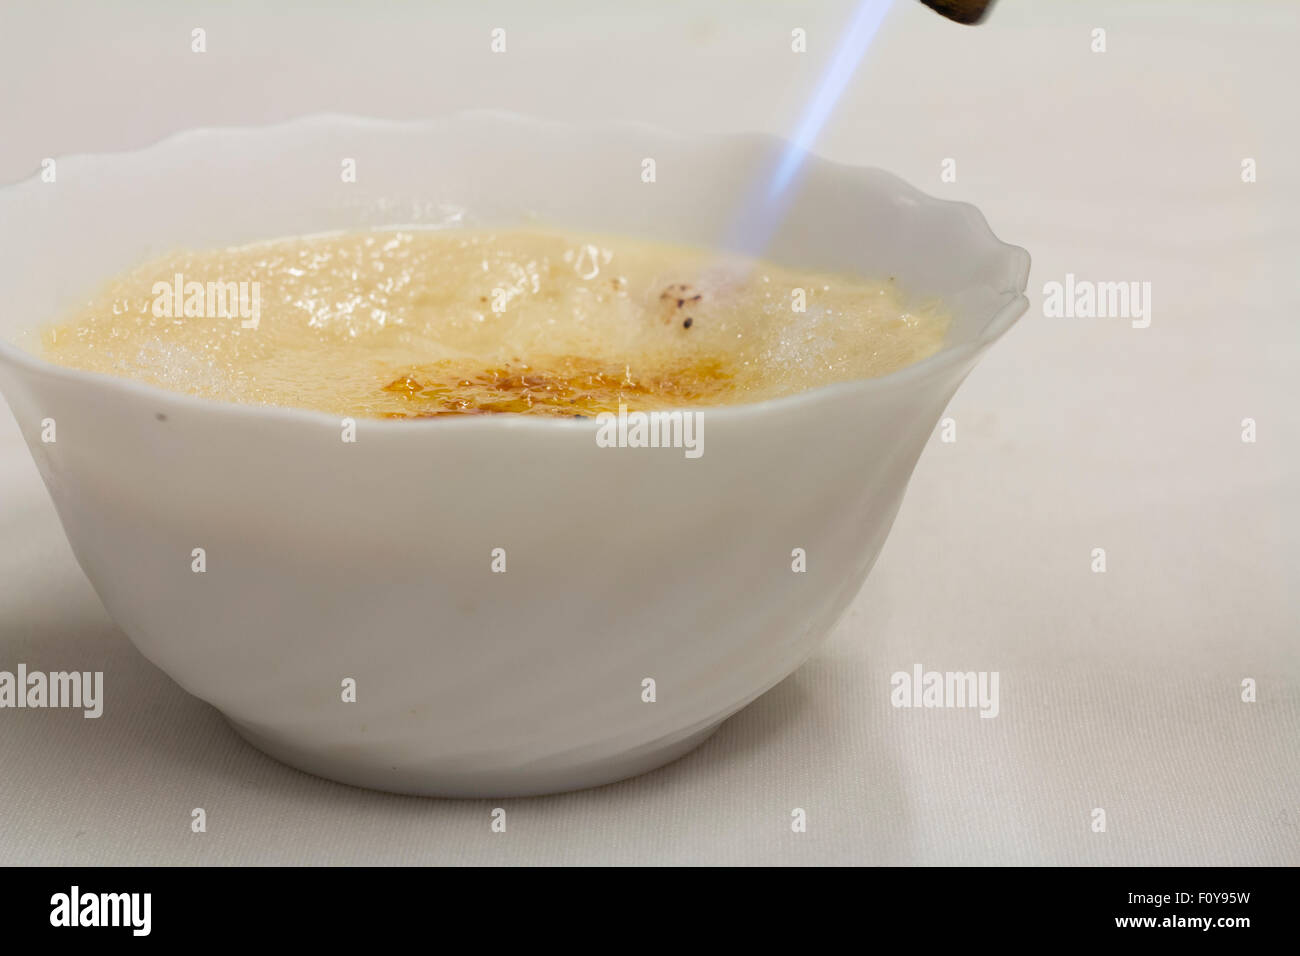 Arroz con leche (rice with milk) is an Asturias' typical dessert. Stock Photo